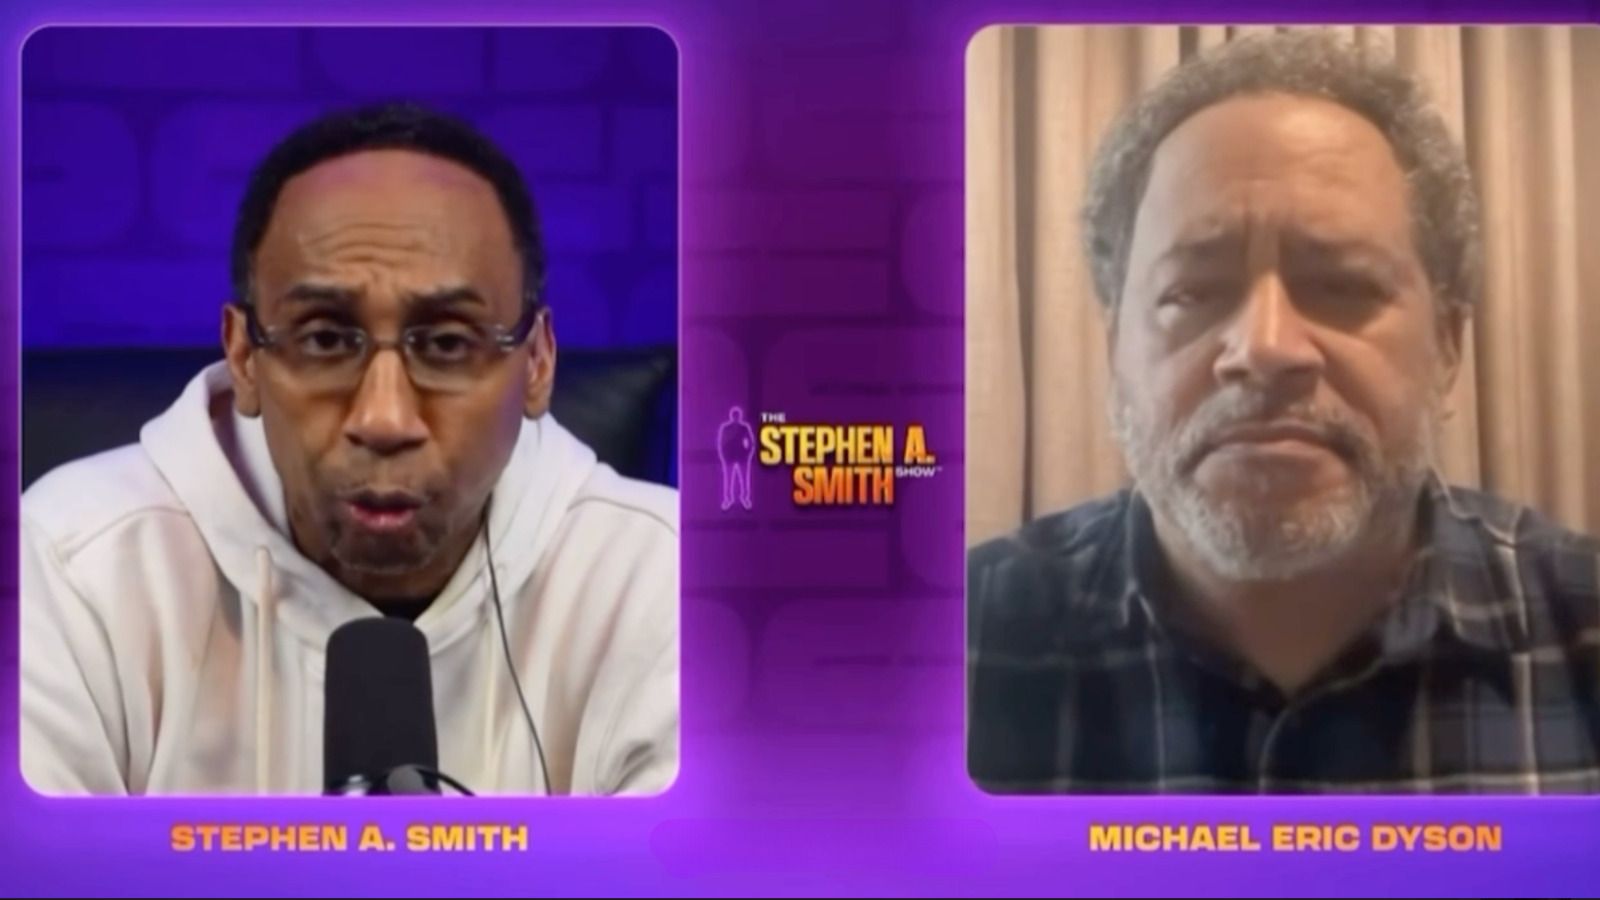 Stephen A. Smith: “You’re in trouble if you’re a Biden supporter!”